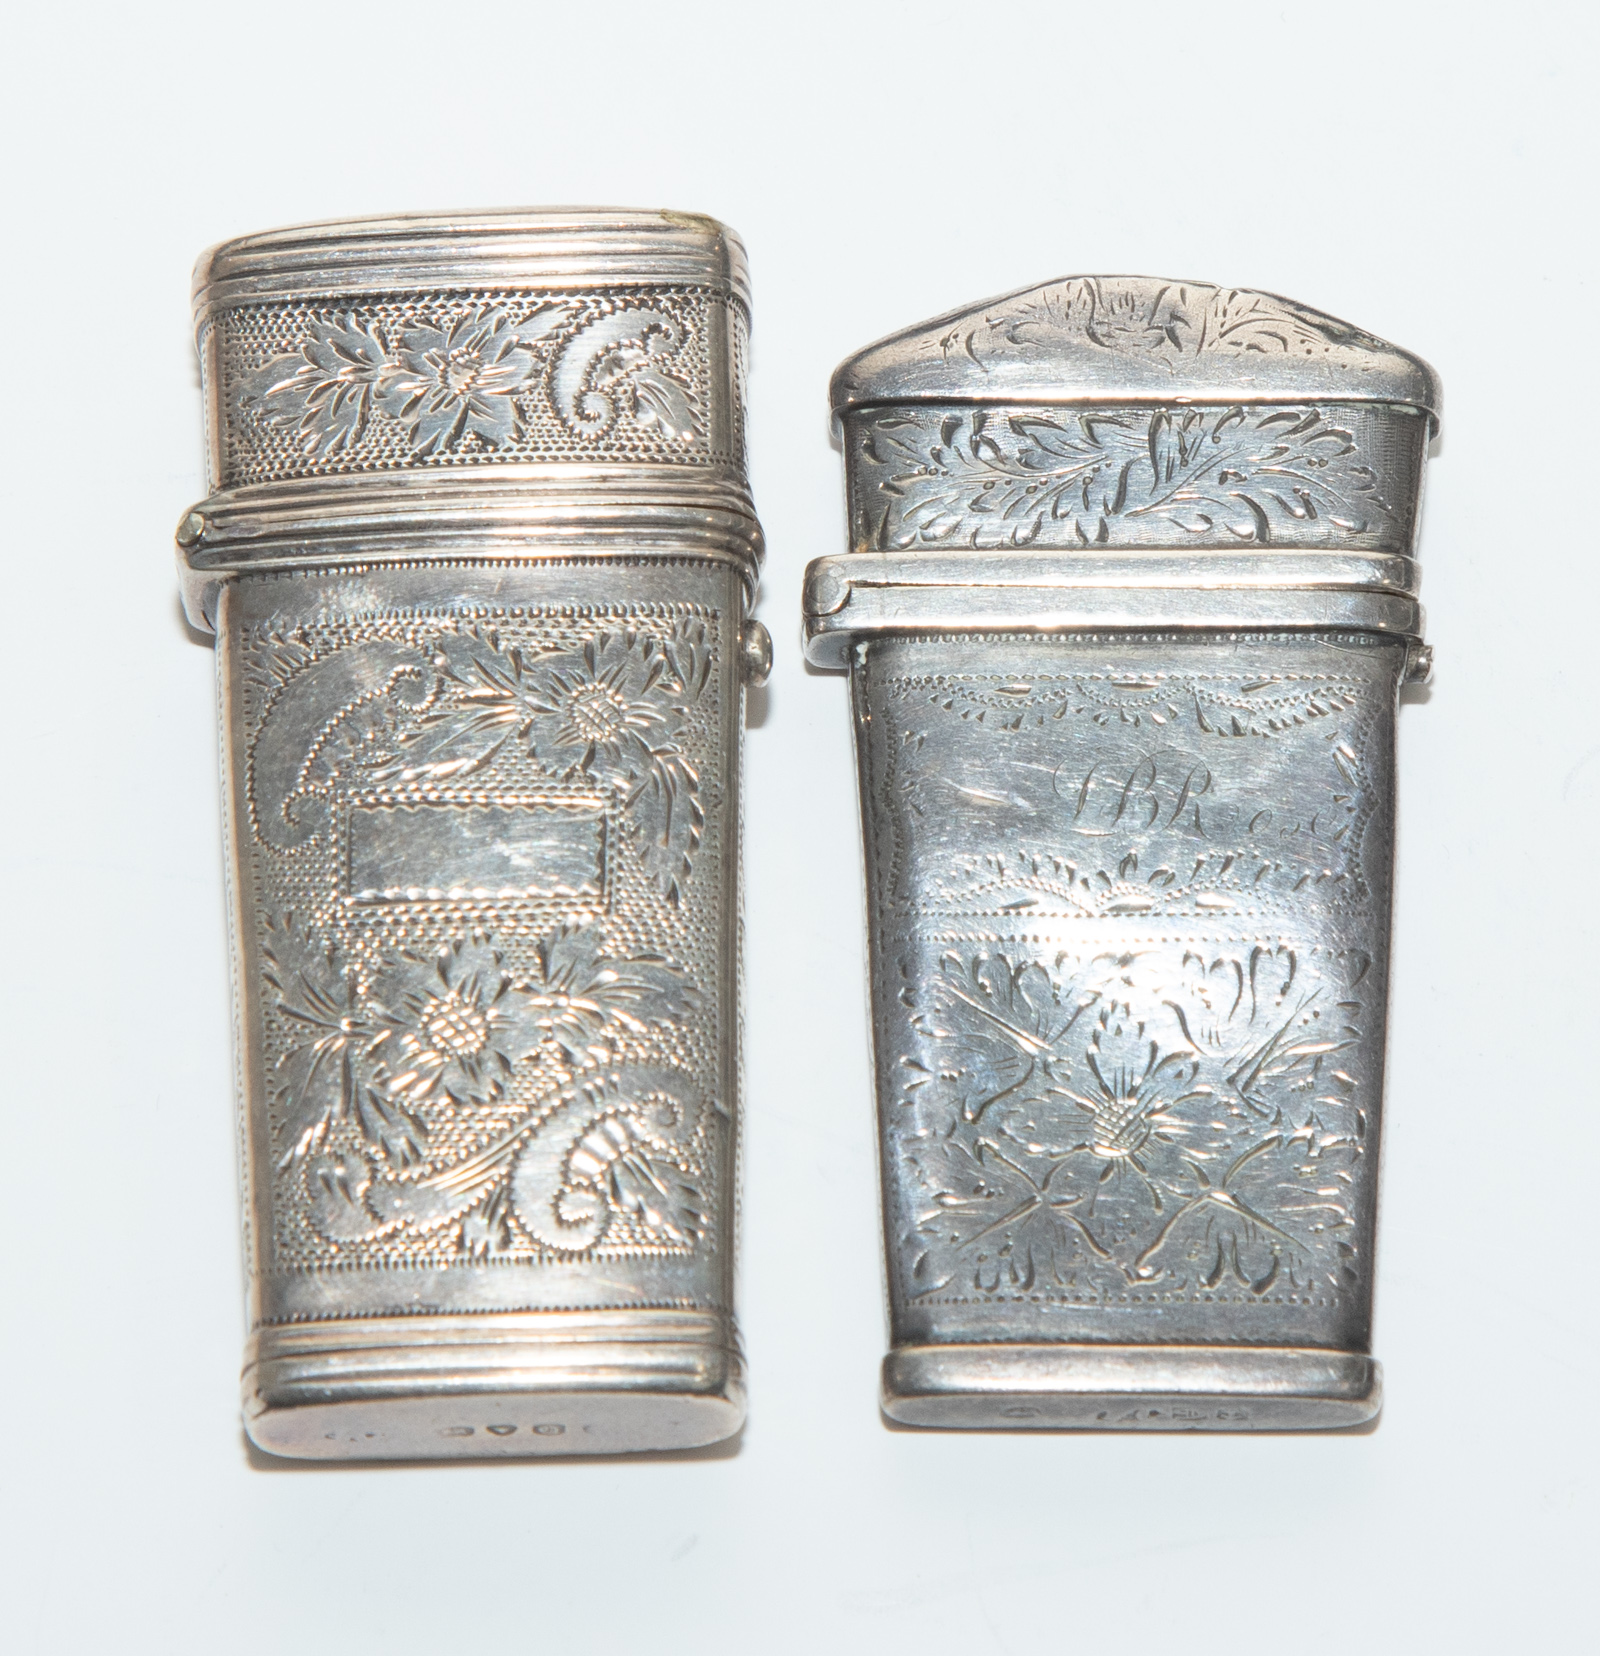 GEORGE IV & VICTORIAN SILVER-CASED